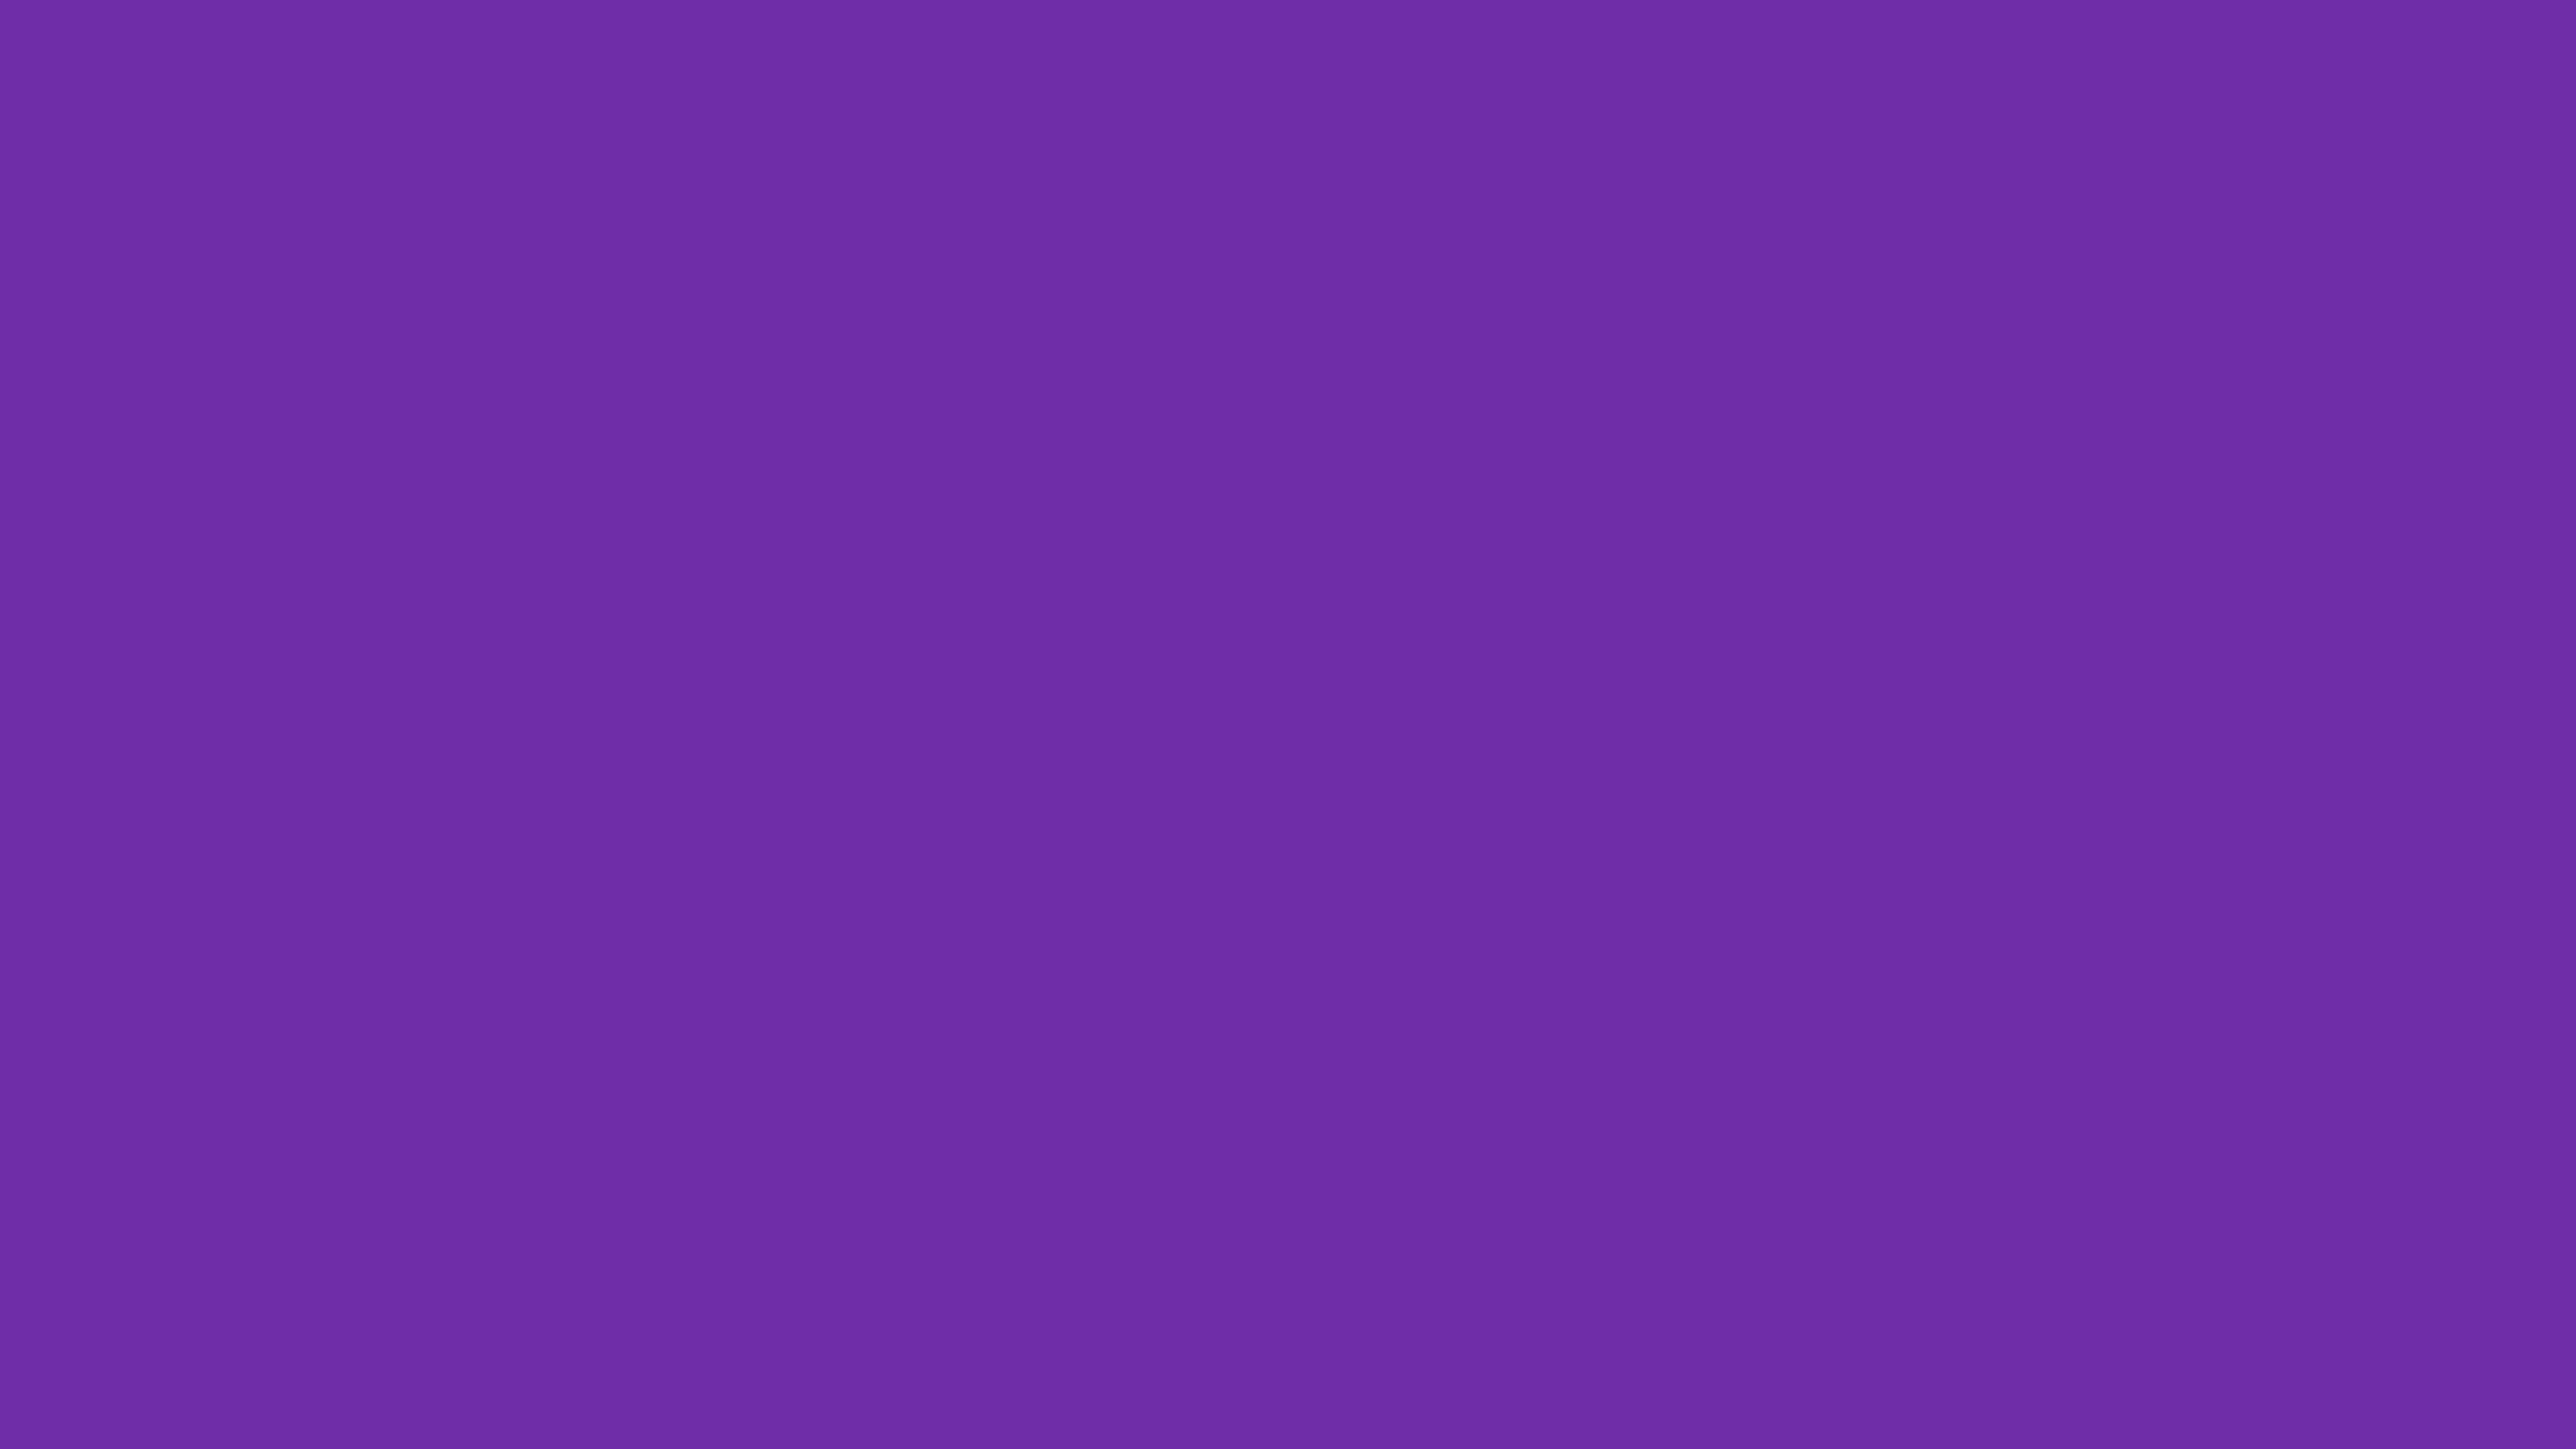 7680x4320 Grape Solid Color Background